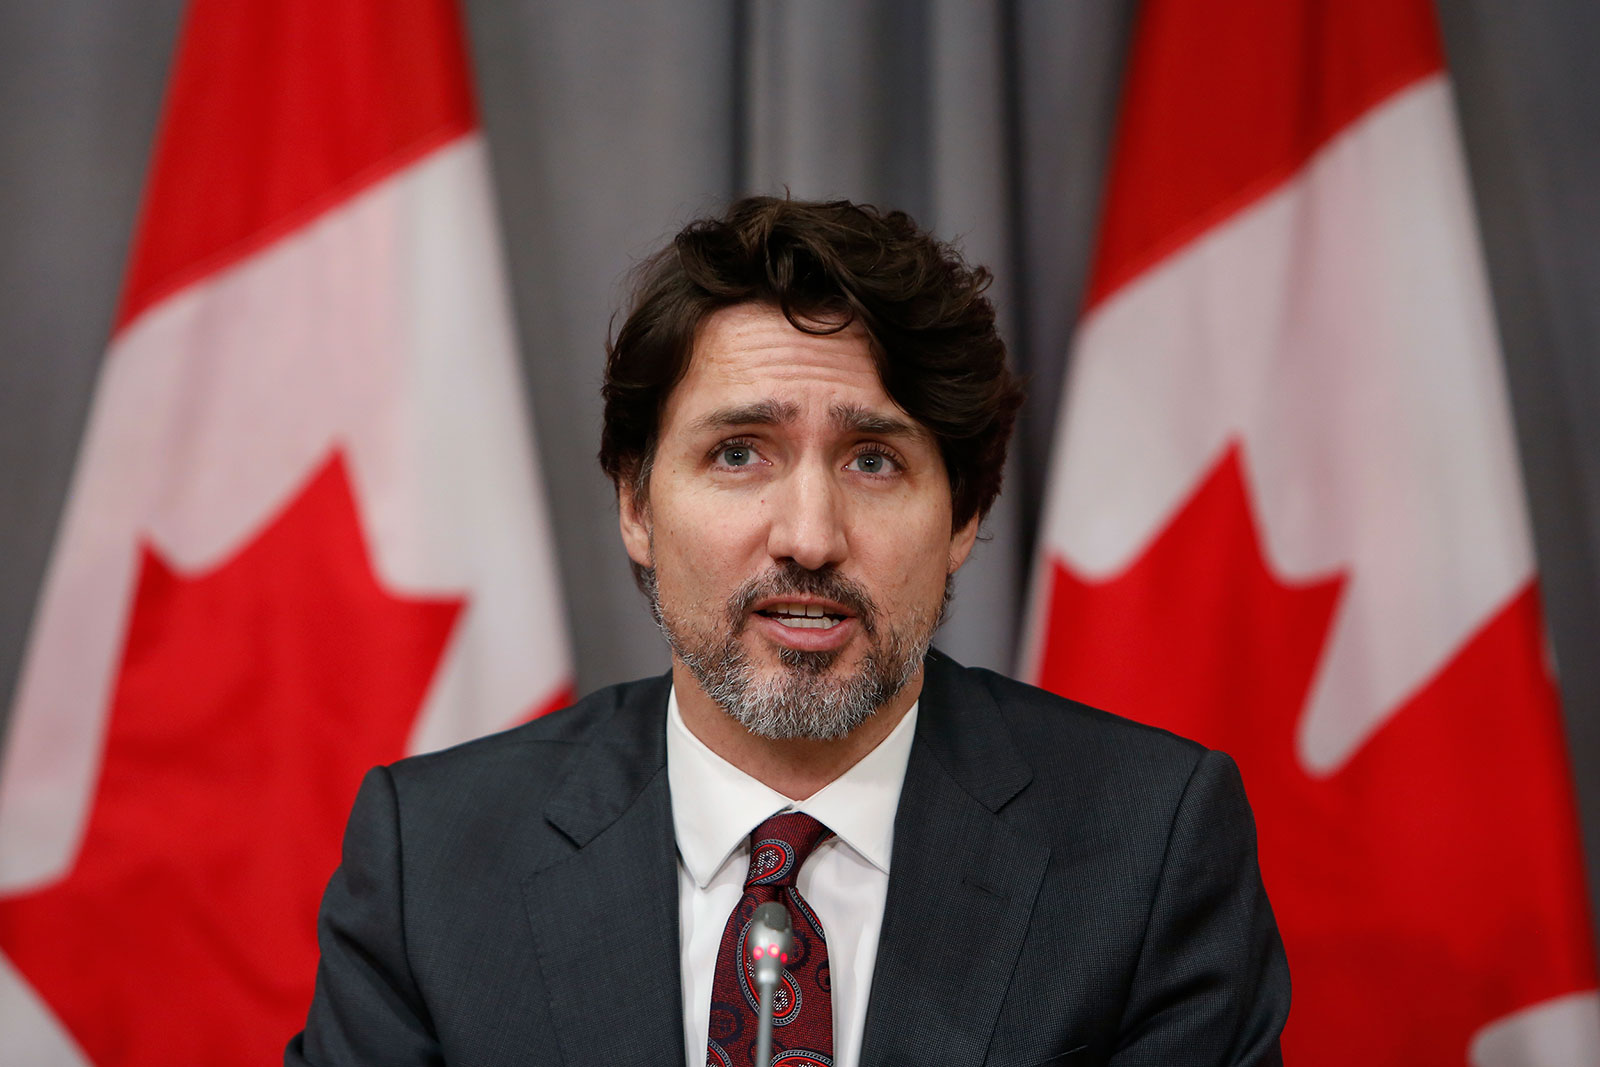 Justin Trudeau speaks during a news conference on Friday, May 1.